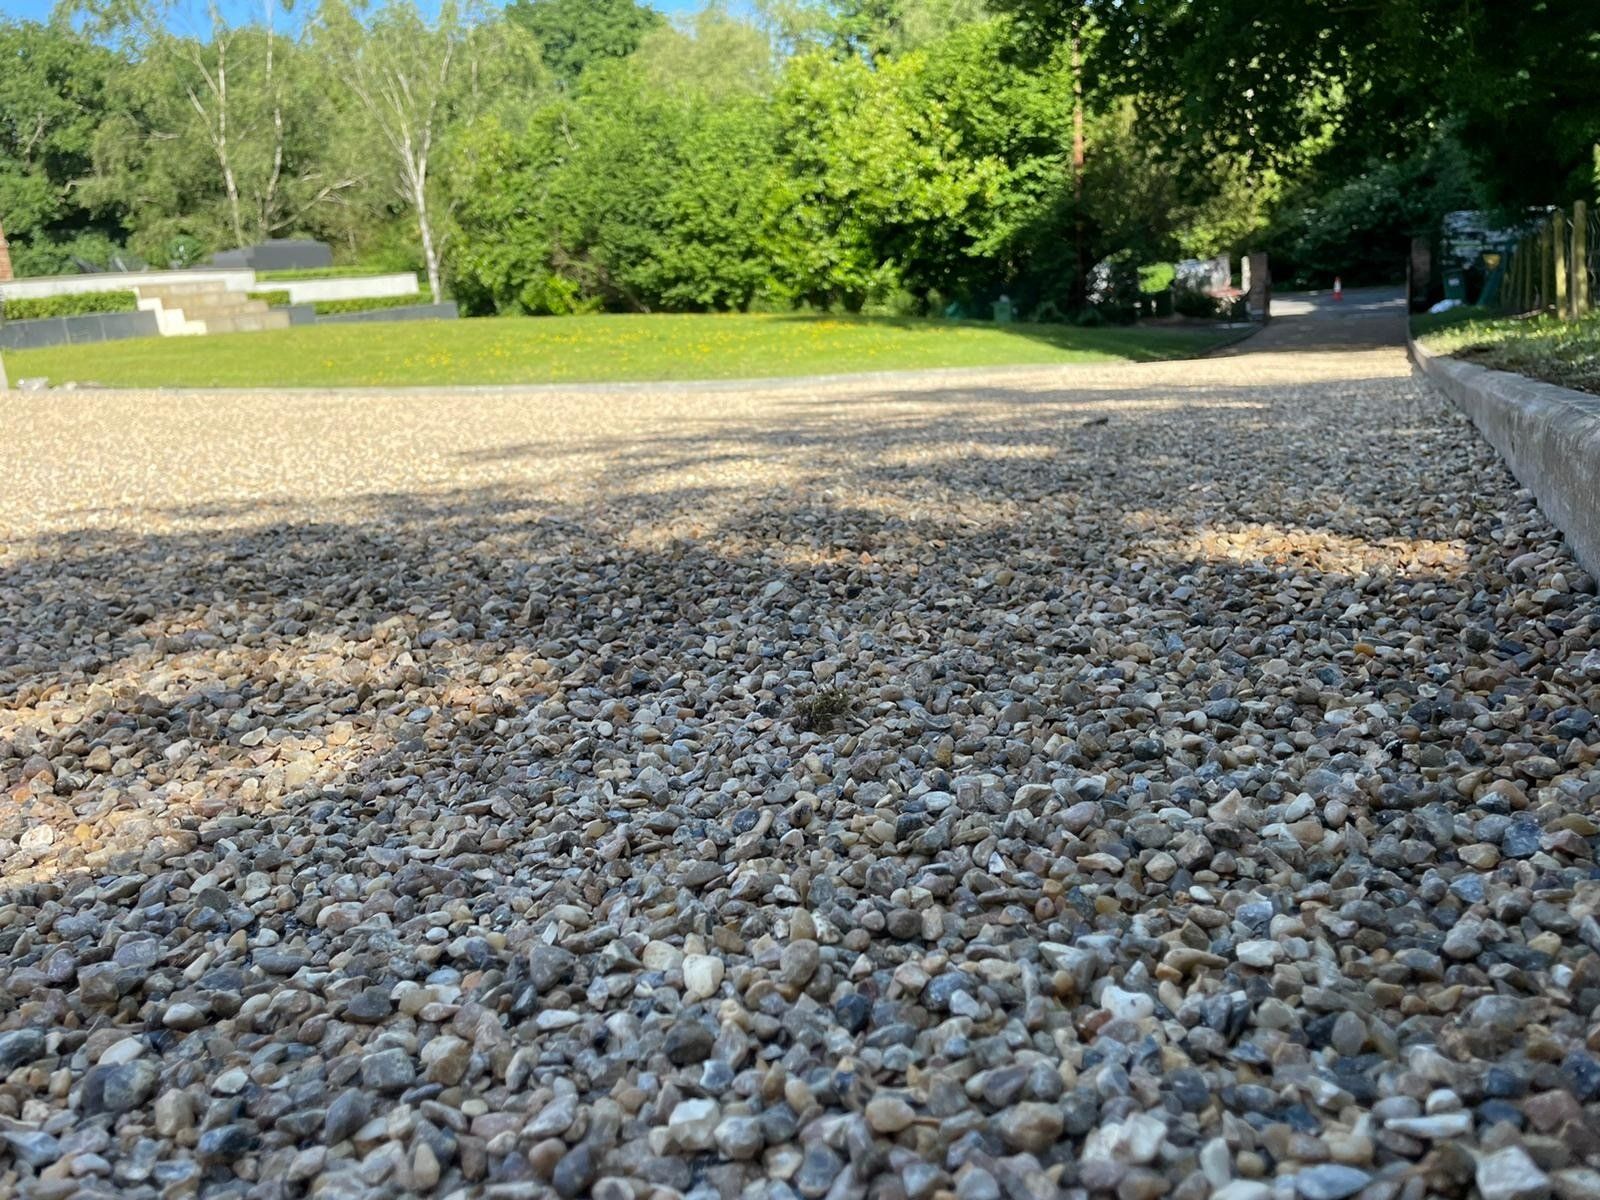 A gravel driveway with trees in the background.